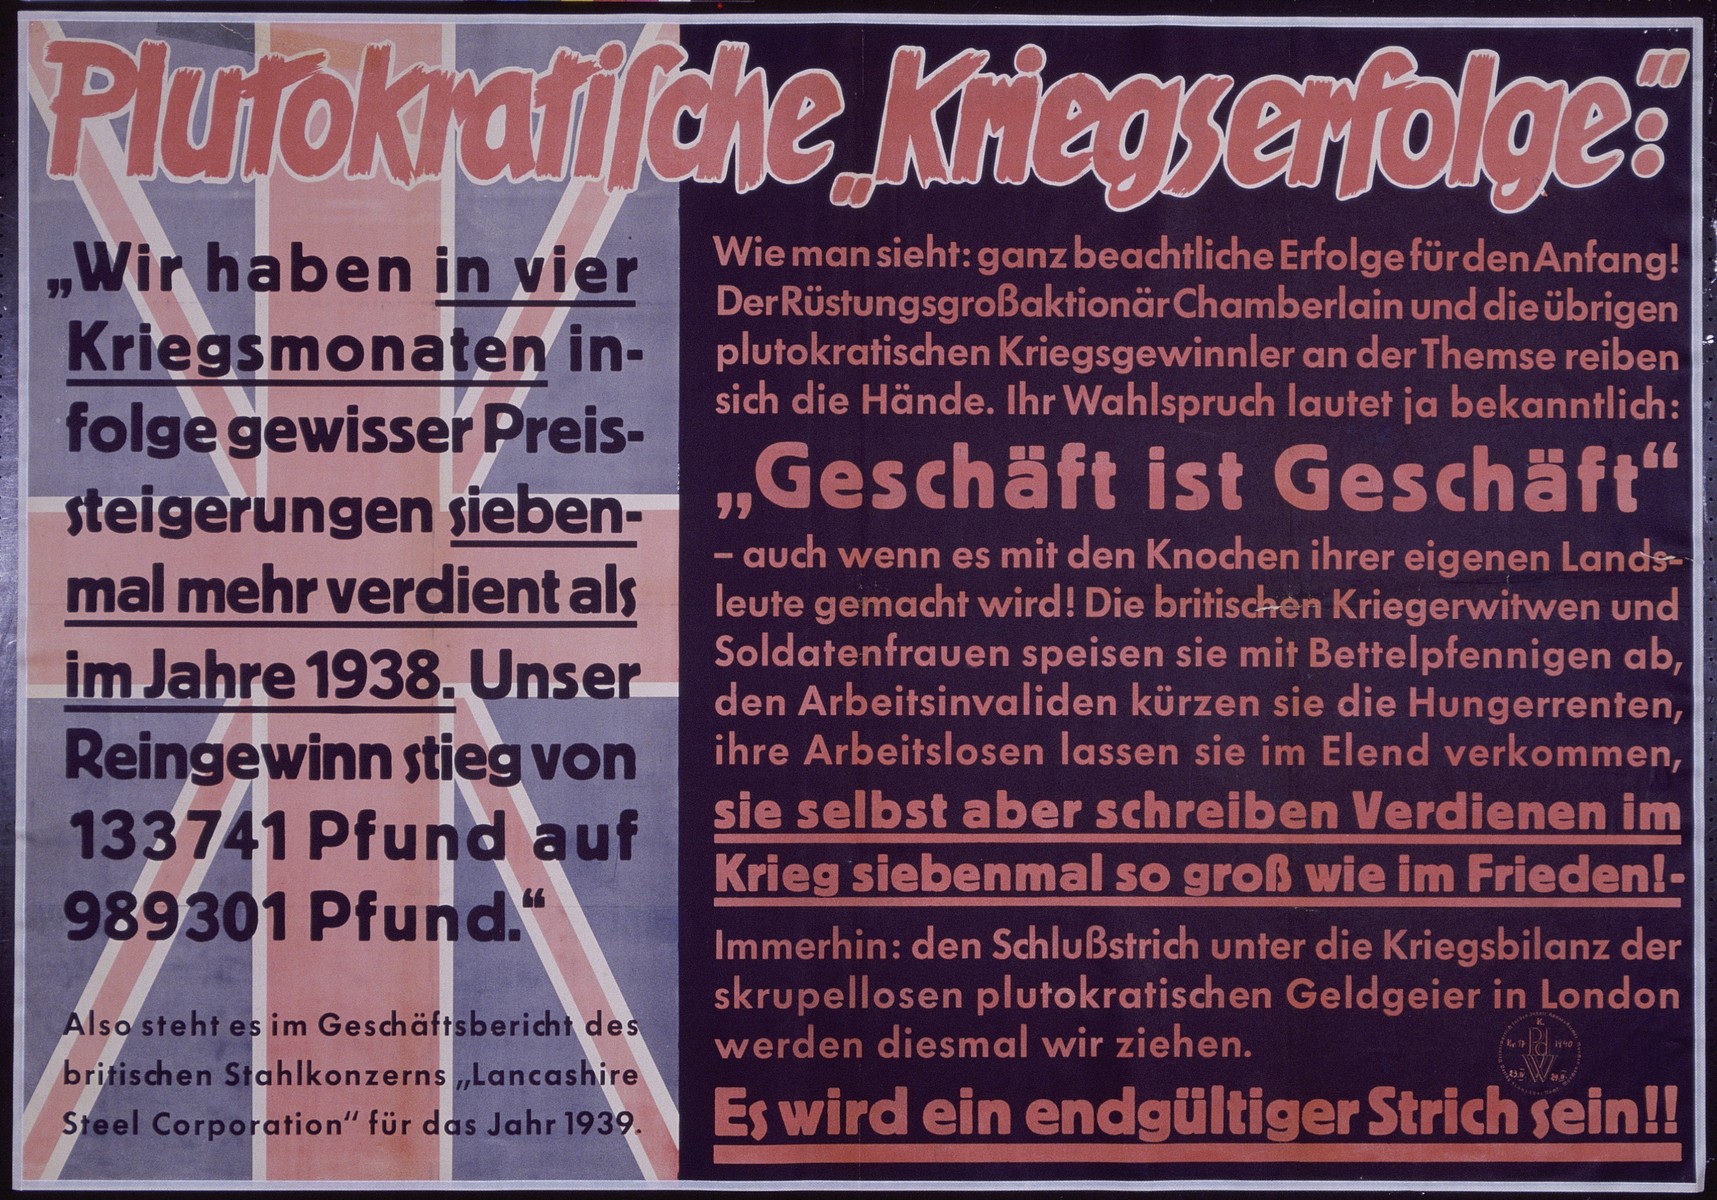 Nazi propaganda poster entitled, "Plutokratische Kriegserfolge," issued by the "Parole der Woche," a wall newspaper (Wandzeitung) published by the National Socialist Party propaganda office in Munich.